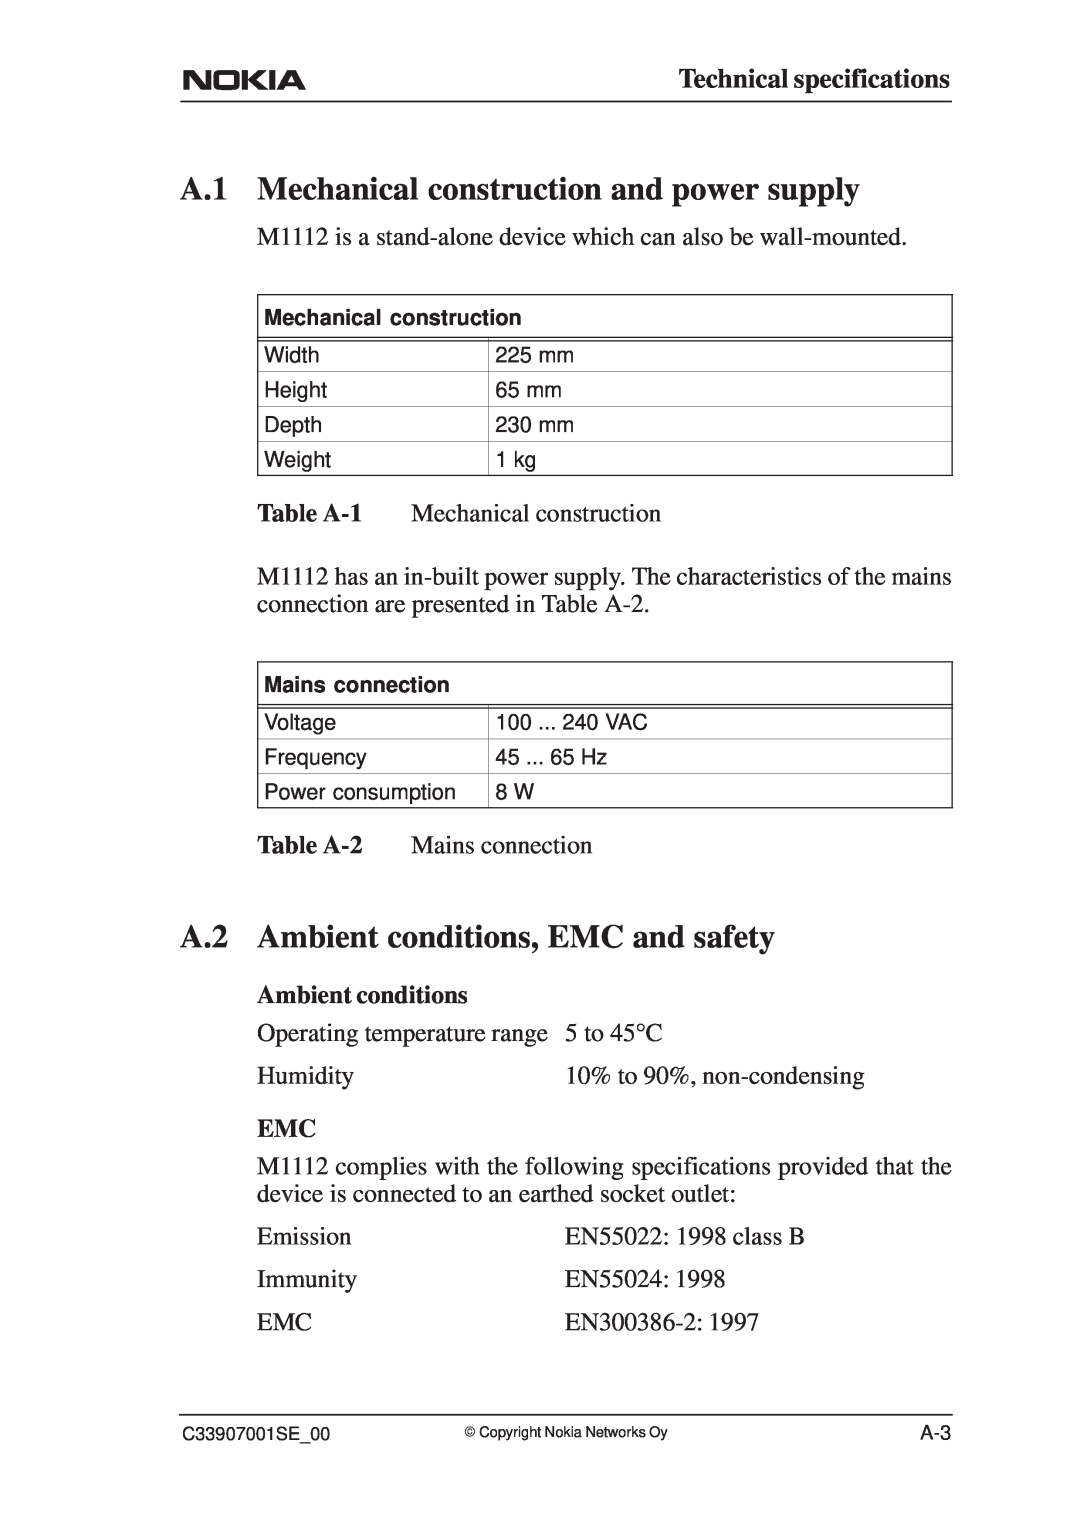 Nokia M1112 A.1 Mechanical construction and power supply, A.2 Ambient conditions, EMC and safety, Technical specifications 